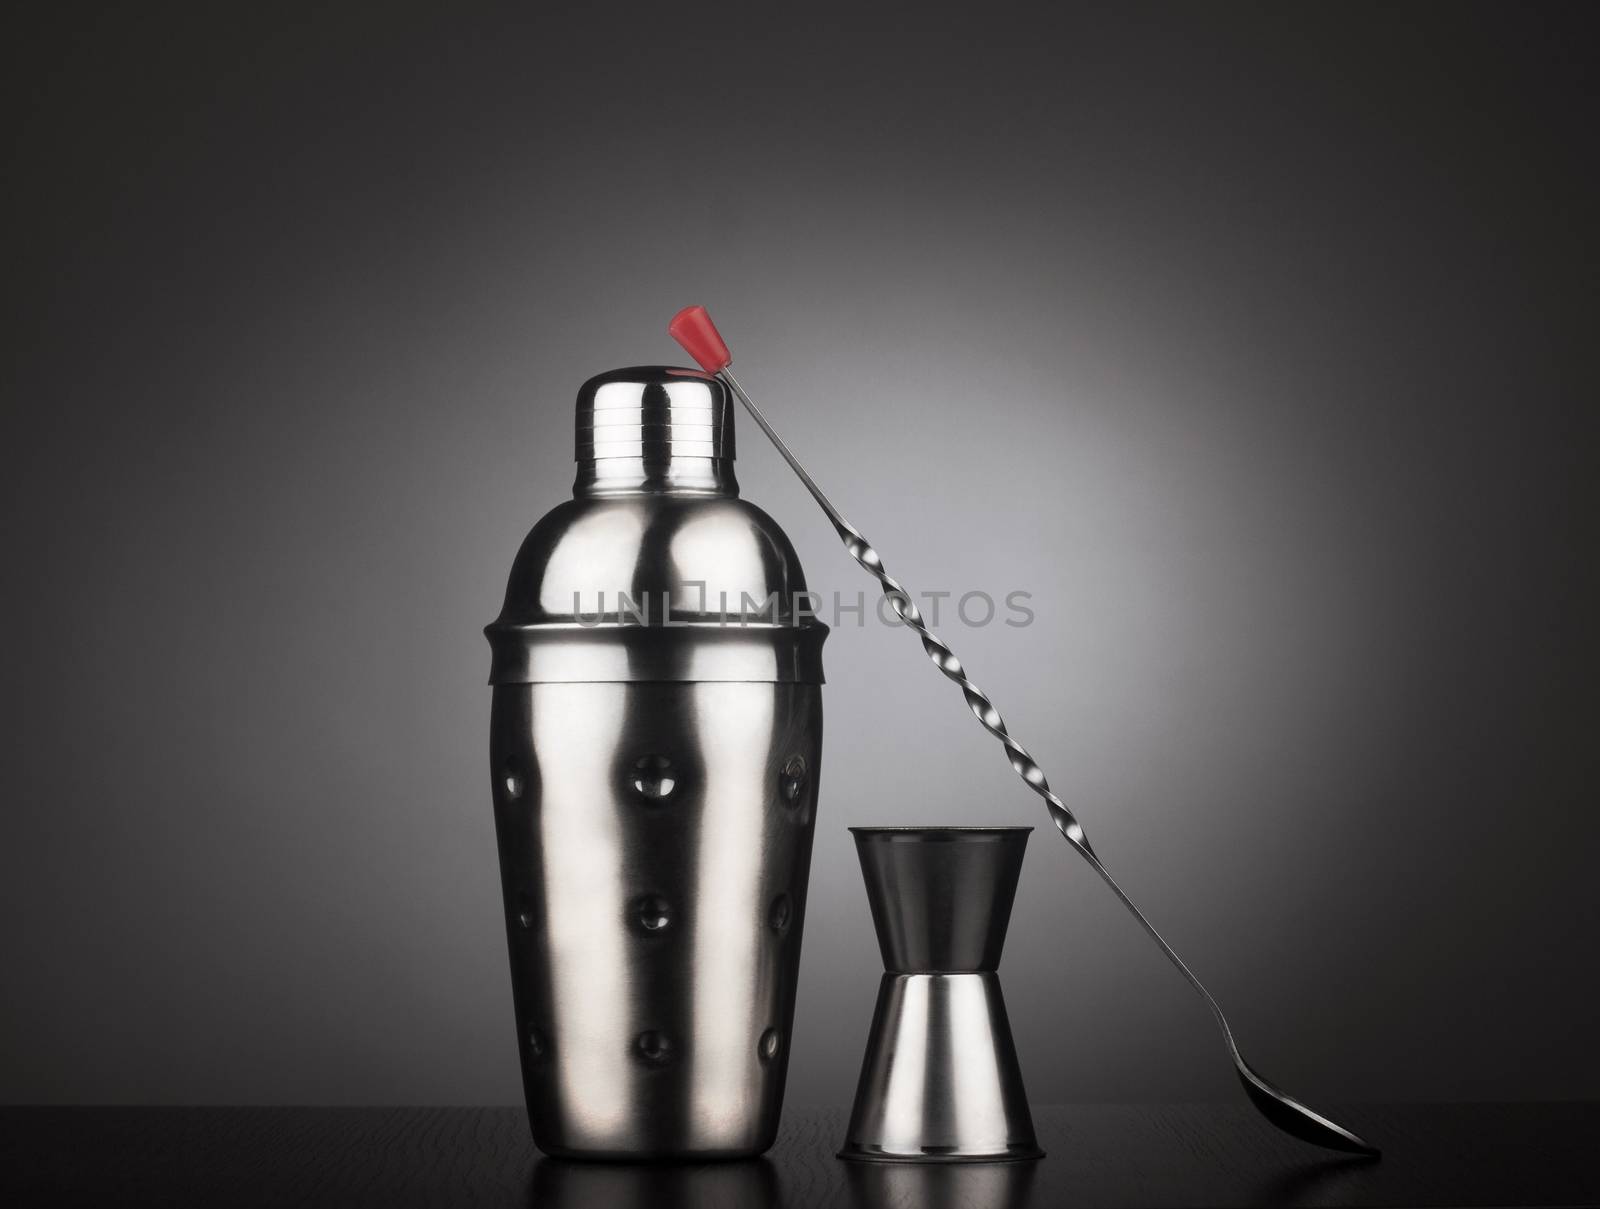 Drinks shaker with cocktail tools by macondo